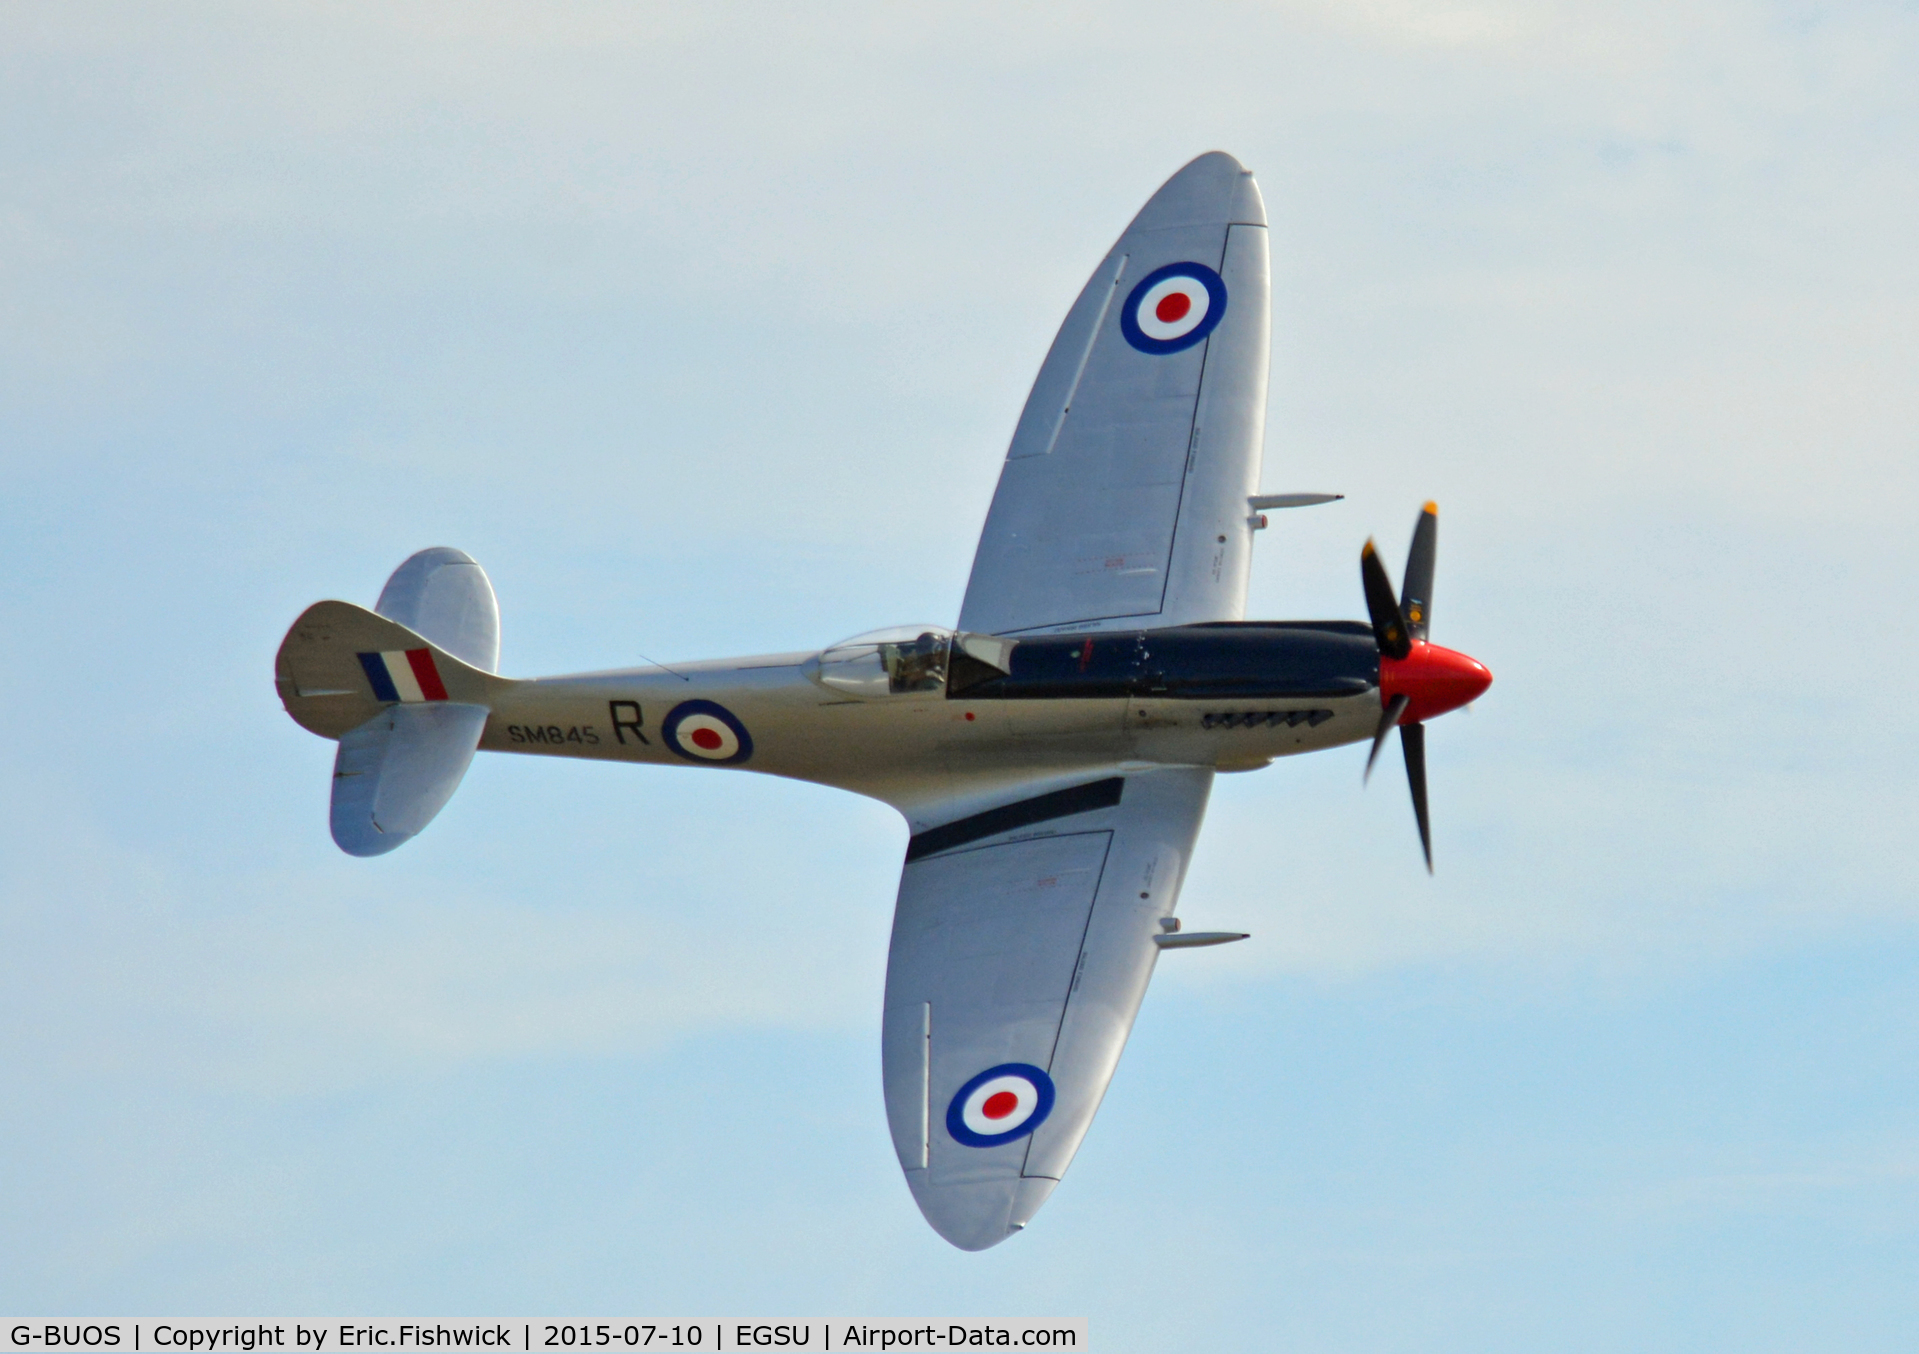 G-BUOS, 1945 Supermarine 394 Spitfire FR.XVIIIe C/N 6S/672224, 42. SM845 preparing for The Flying Legends Air Show, July 2015.